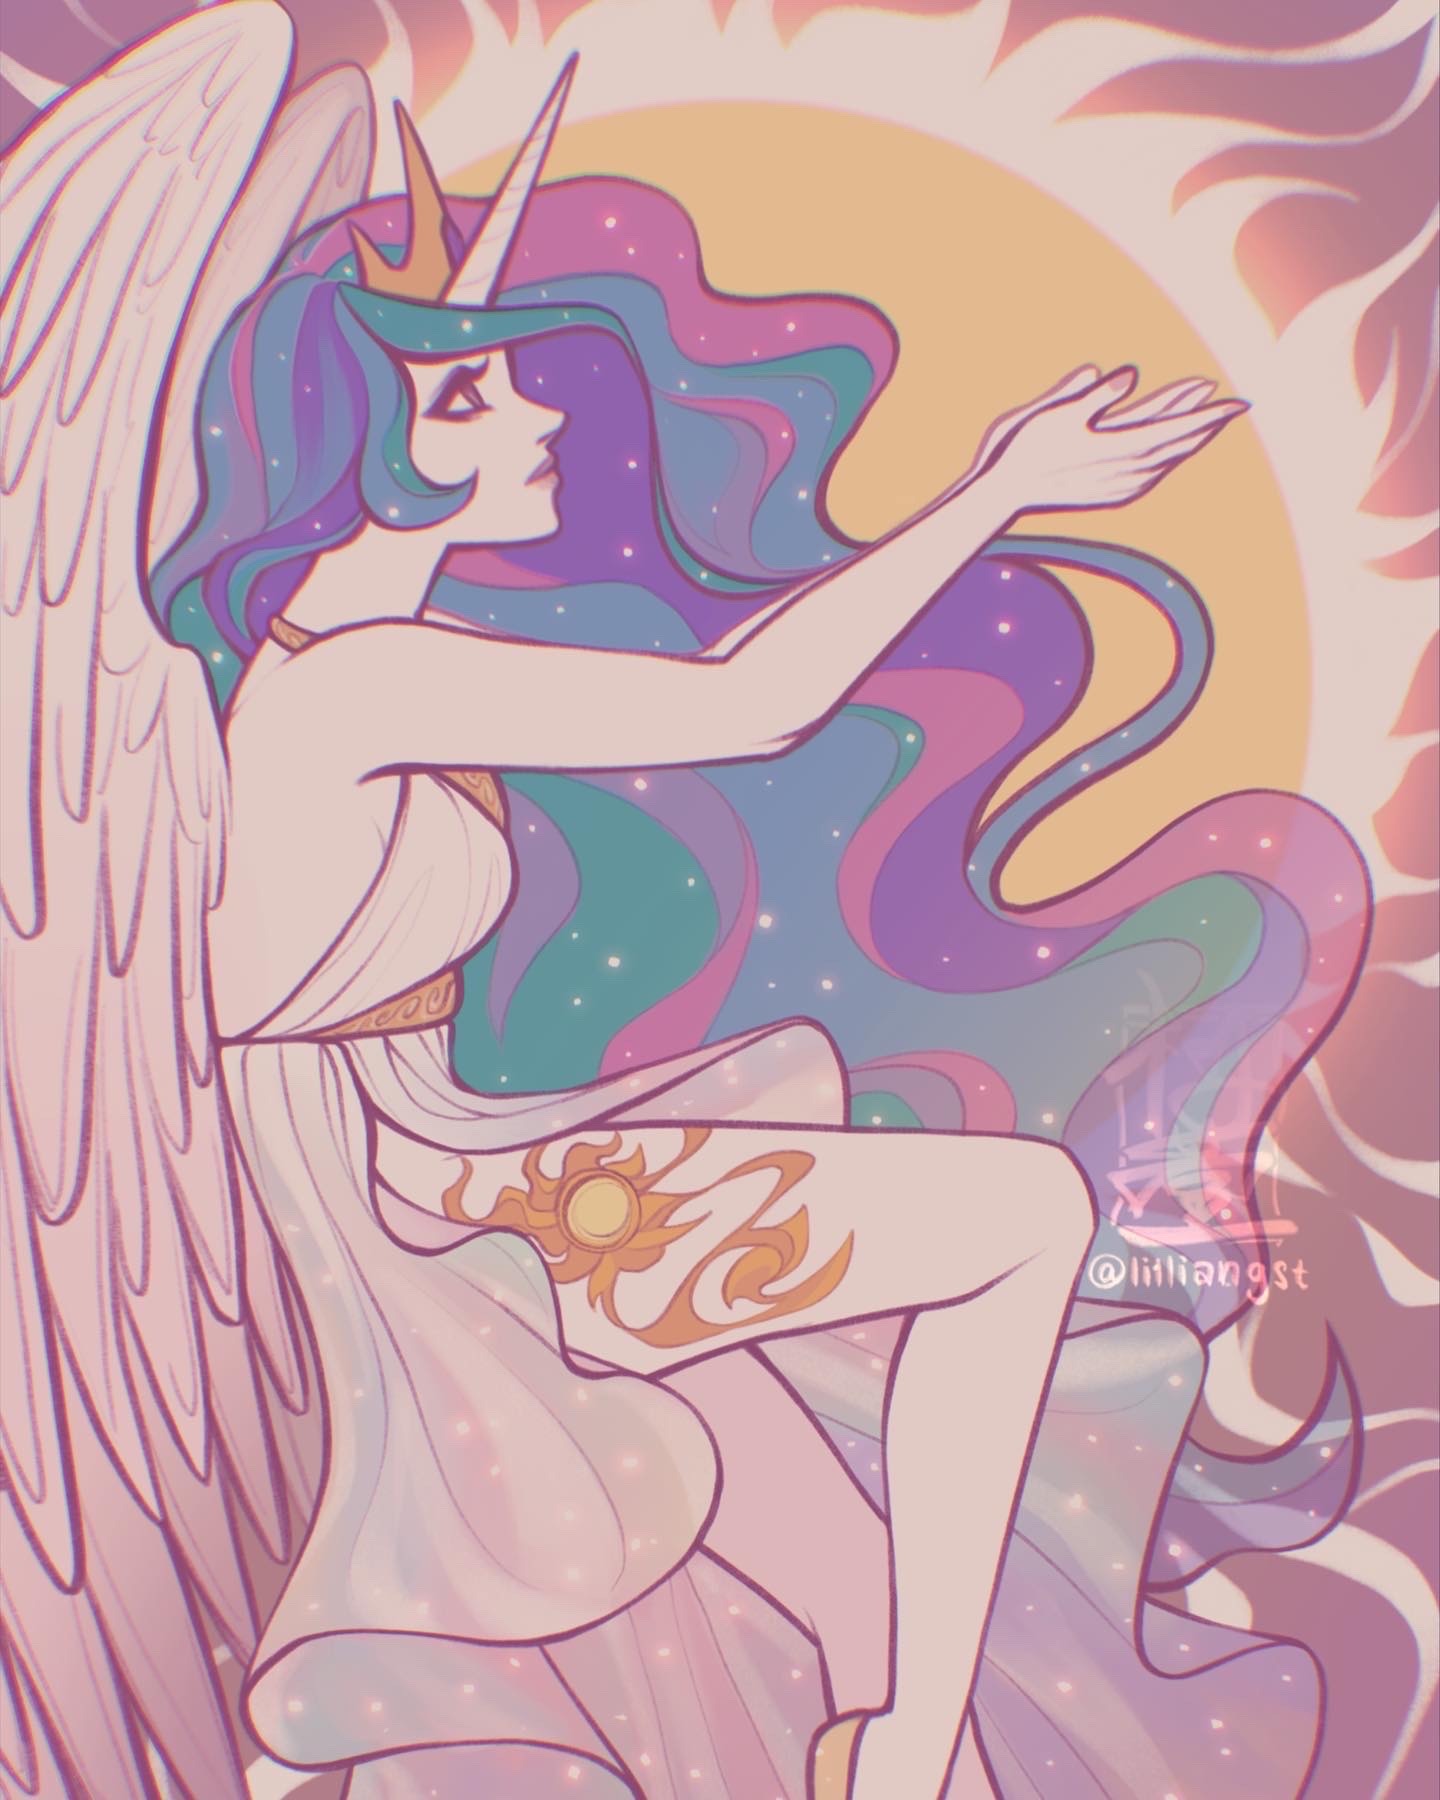 lilliangst:mlp fanart in 2022the animated version is on my insta and i might sell the full length version of these as animated wallpapers Maybe